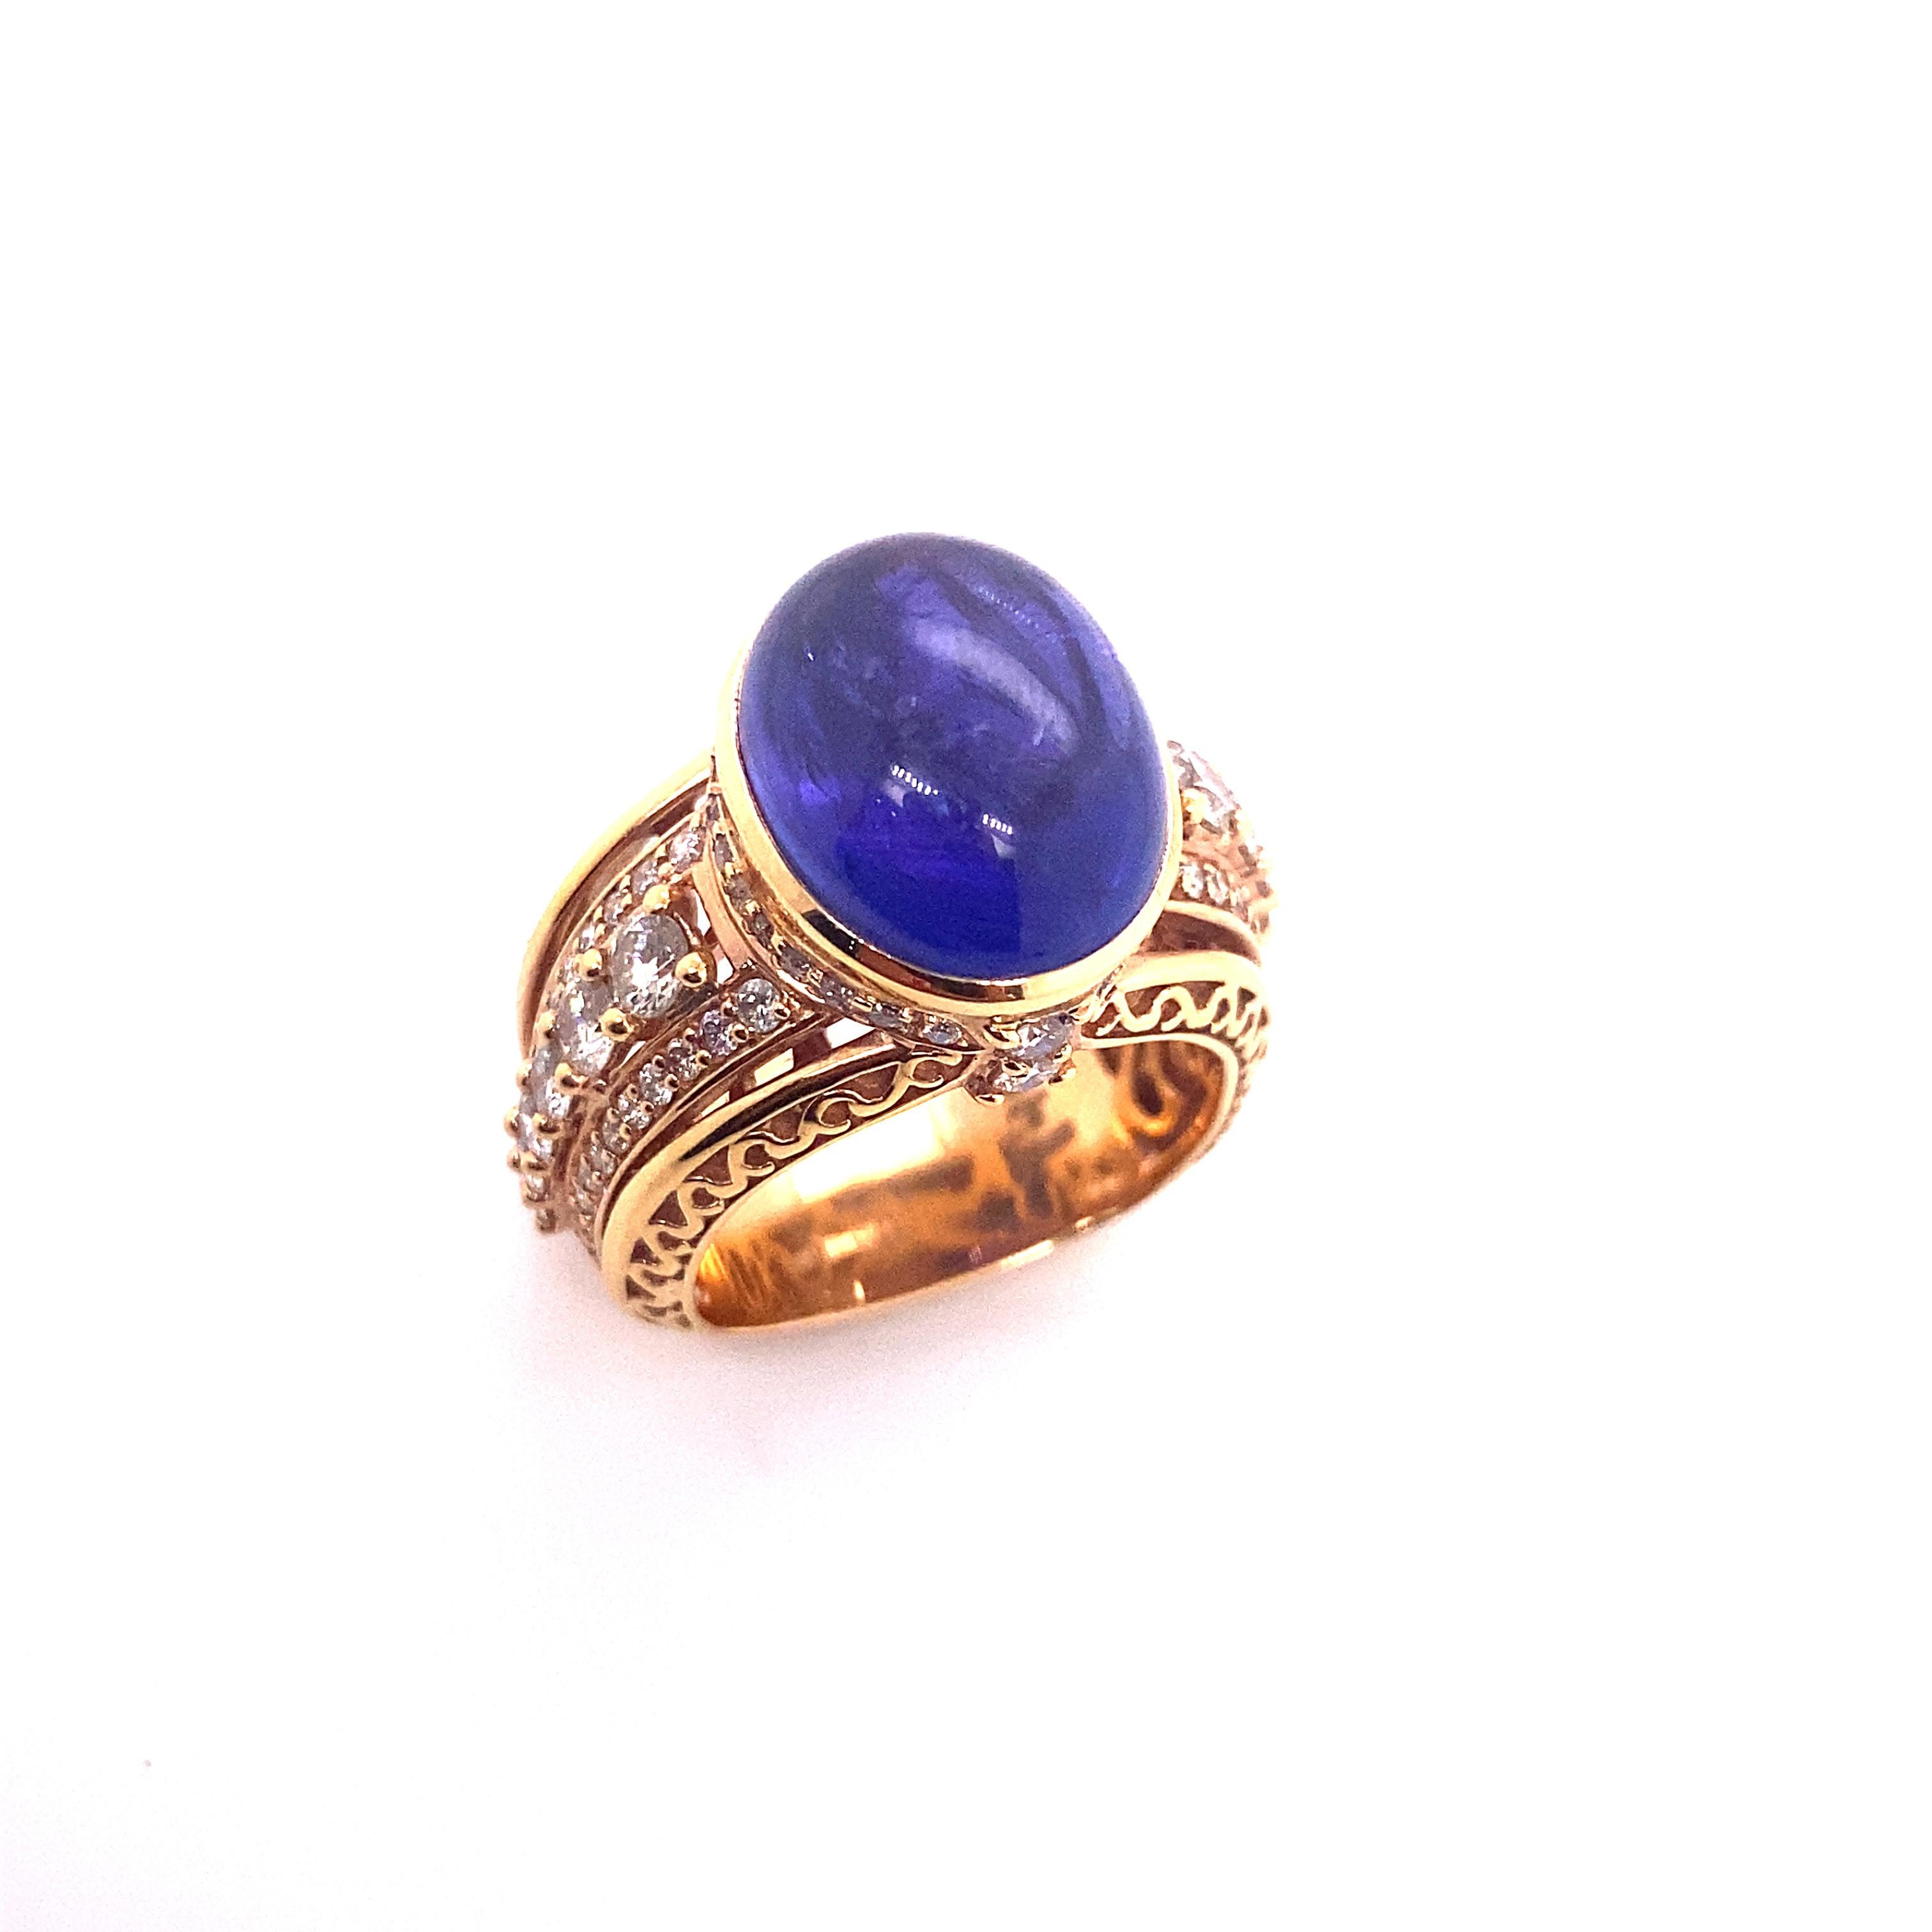 Large Tanzanite Cabochon Ring in 18 Karat Rose Gold and Diamonds

This magnificent cocktail ring features a lustrous Tanzanite cabochon richly vivid in violet-bluish hues. Tanzanite is relatively new to the colored stone galaxy. The most common